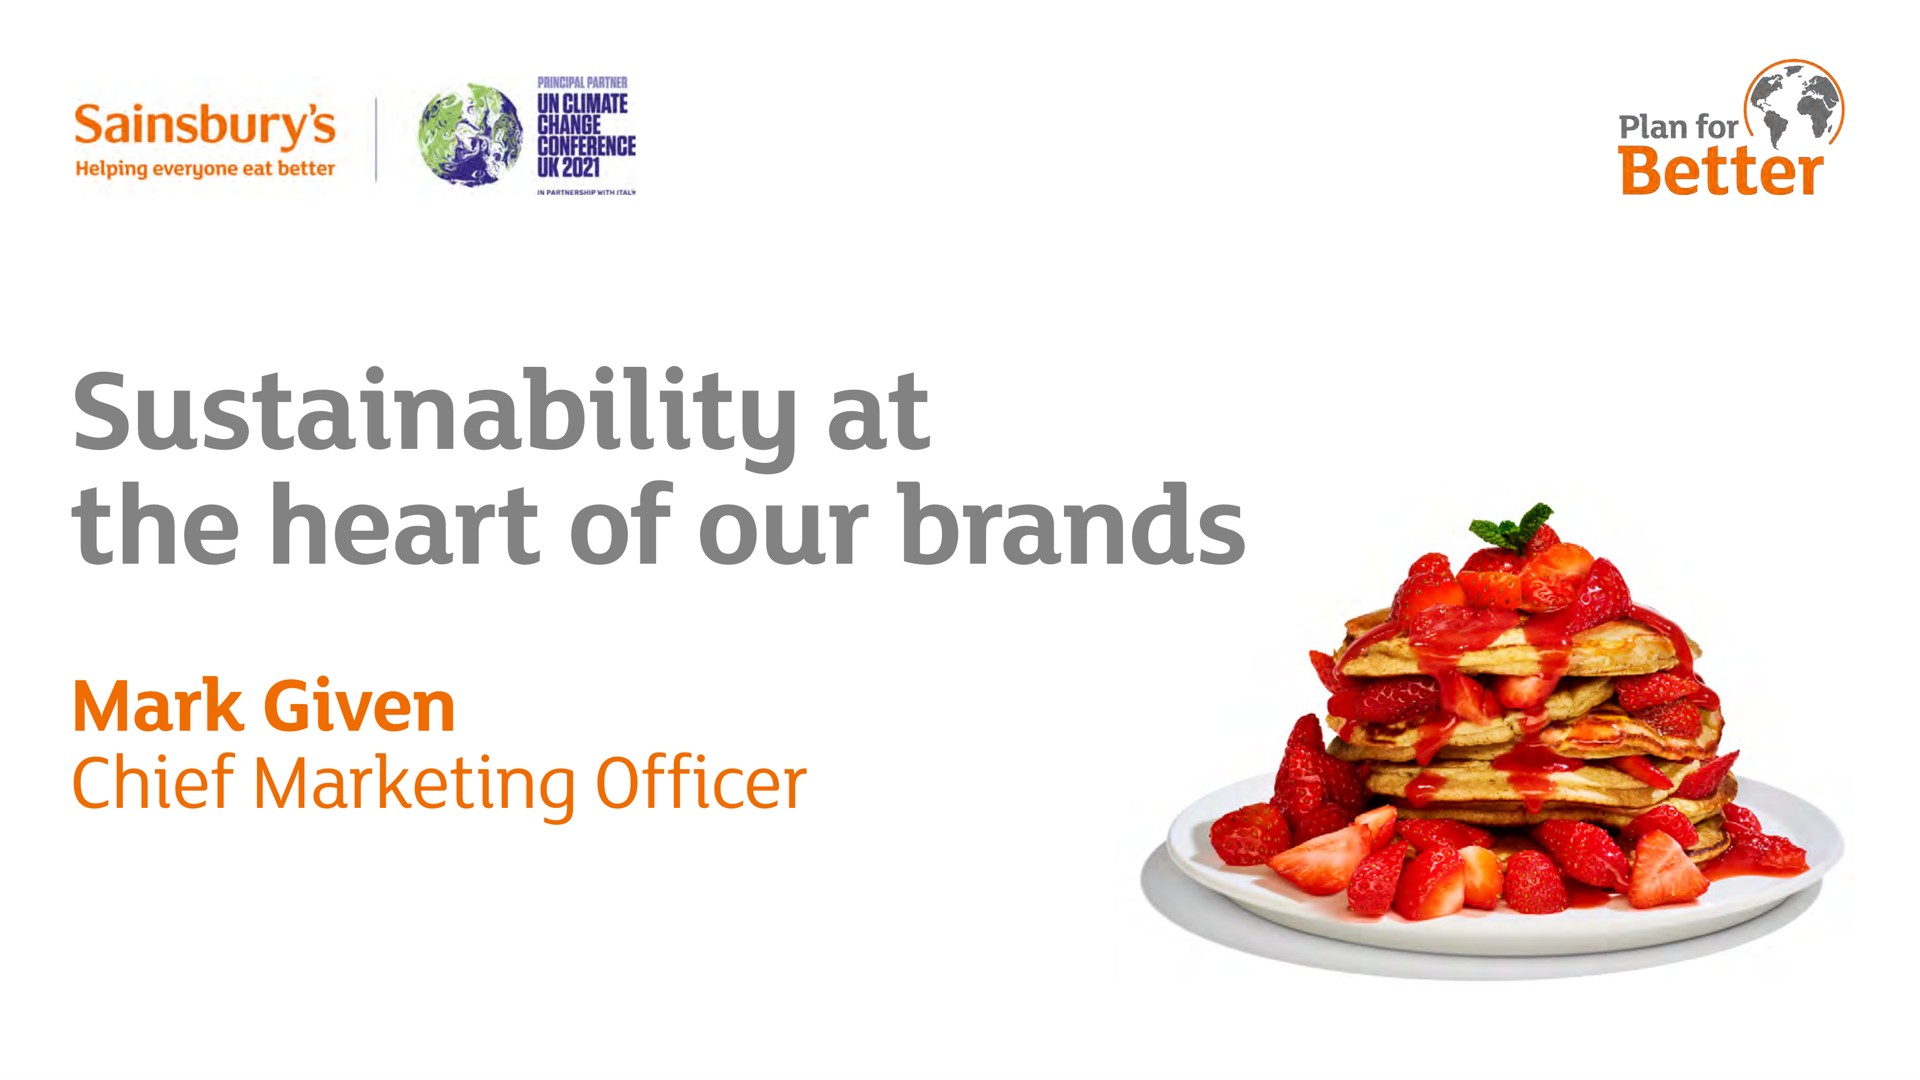 at the heart of our brands mark given chief marketing officer | Sainsbury's